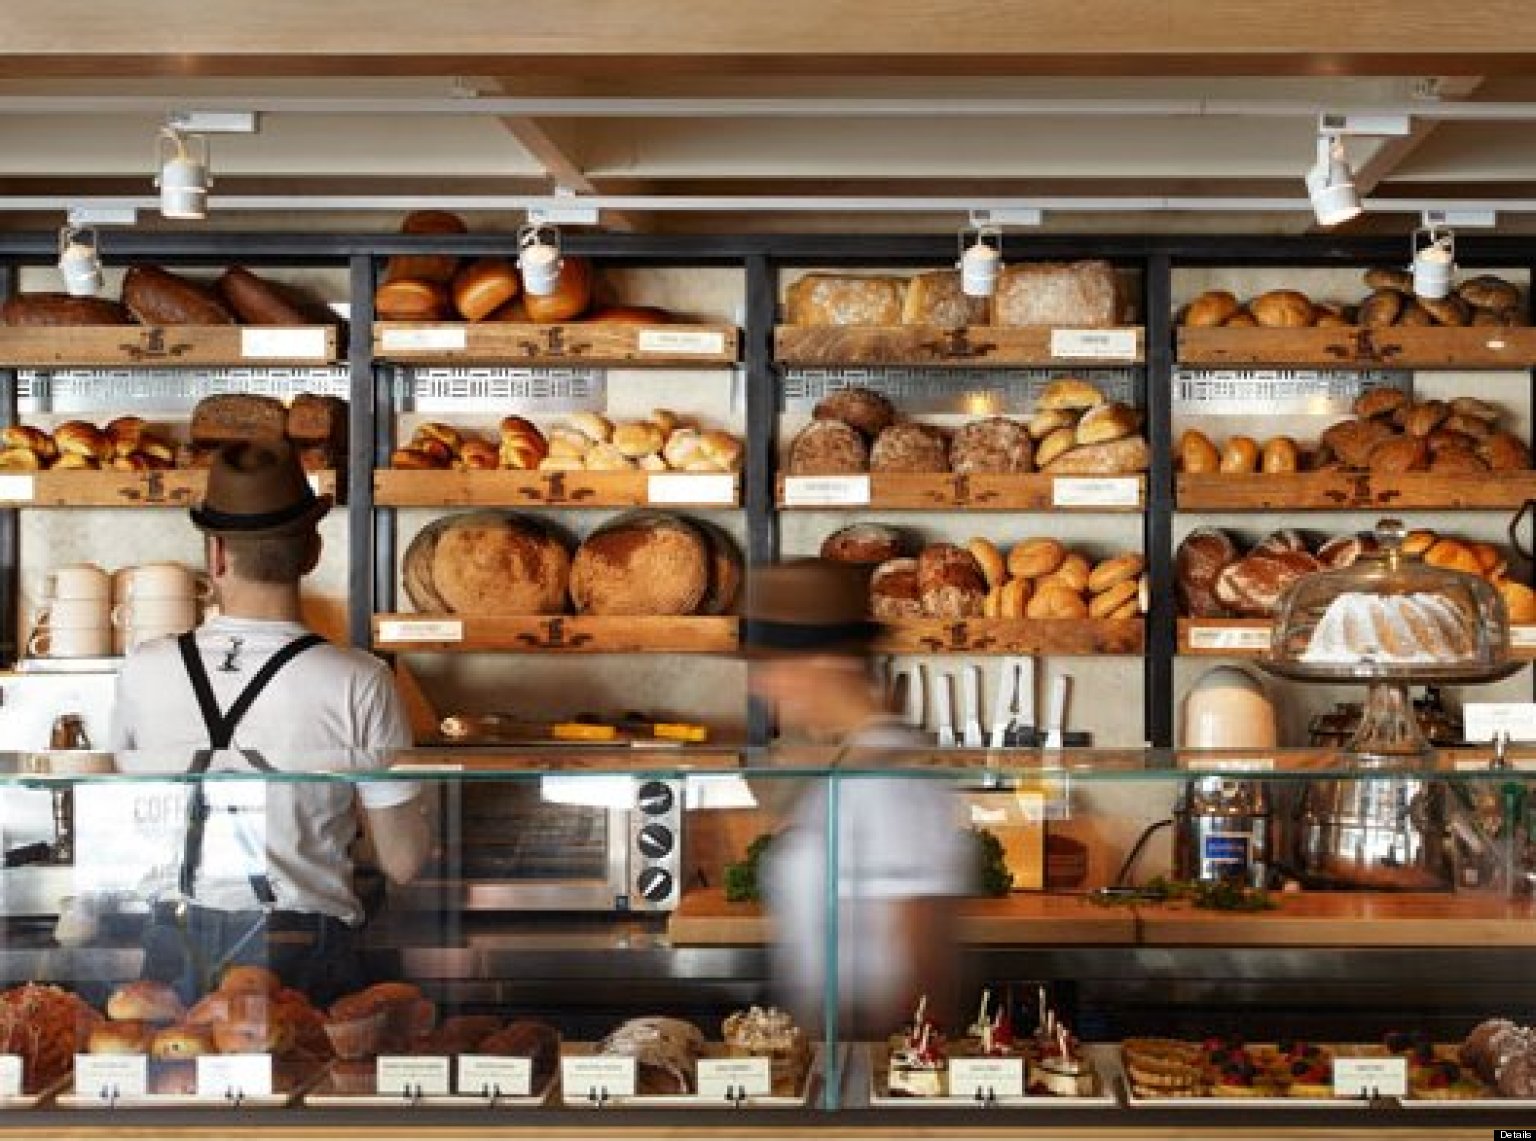 The Best New Bread Bakeries In America, According To 'Details' Magazine | HuffPost